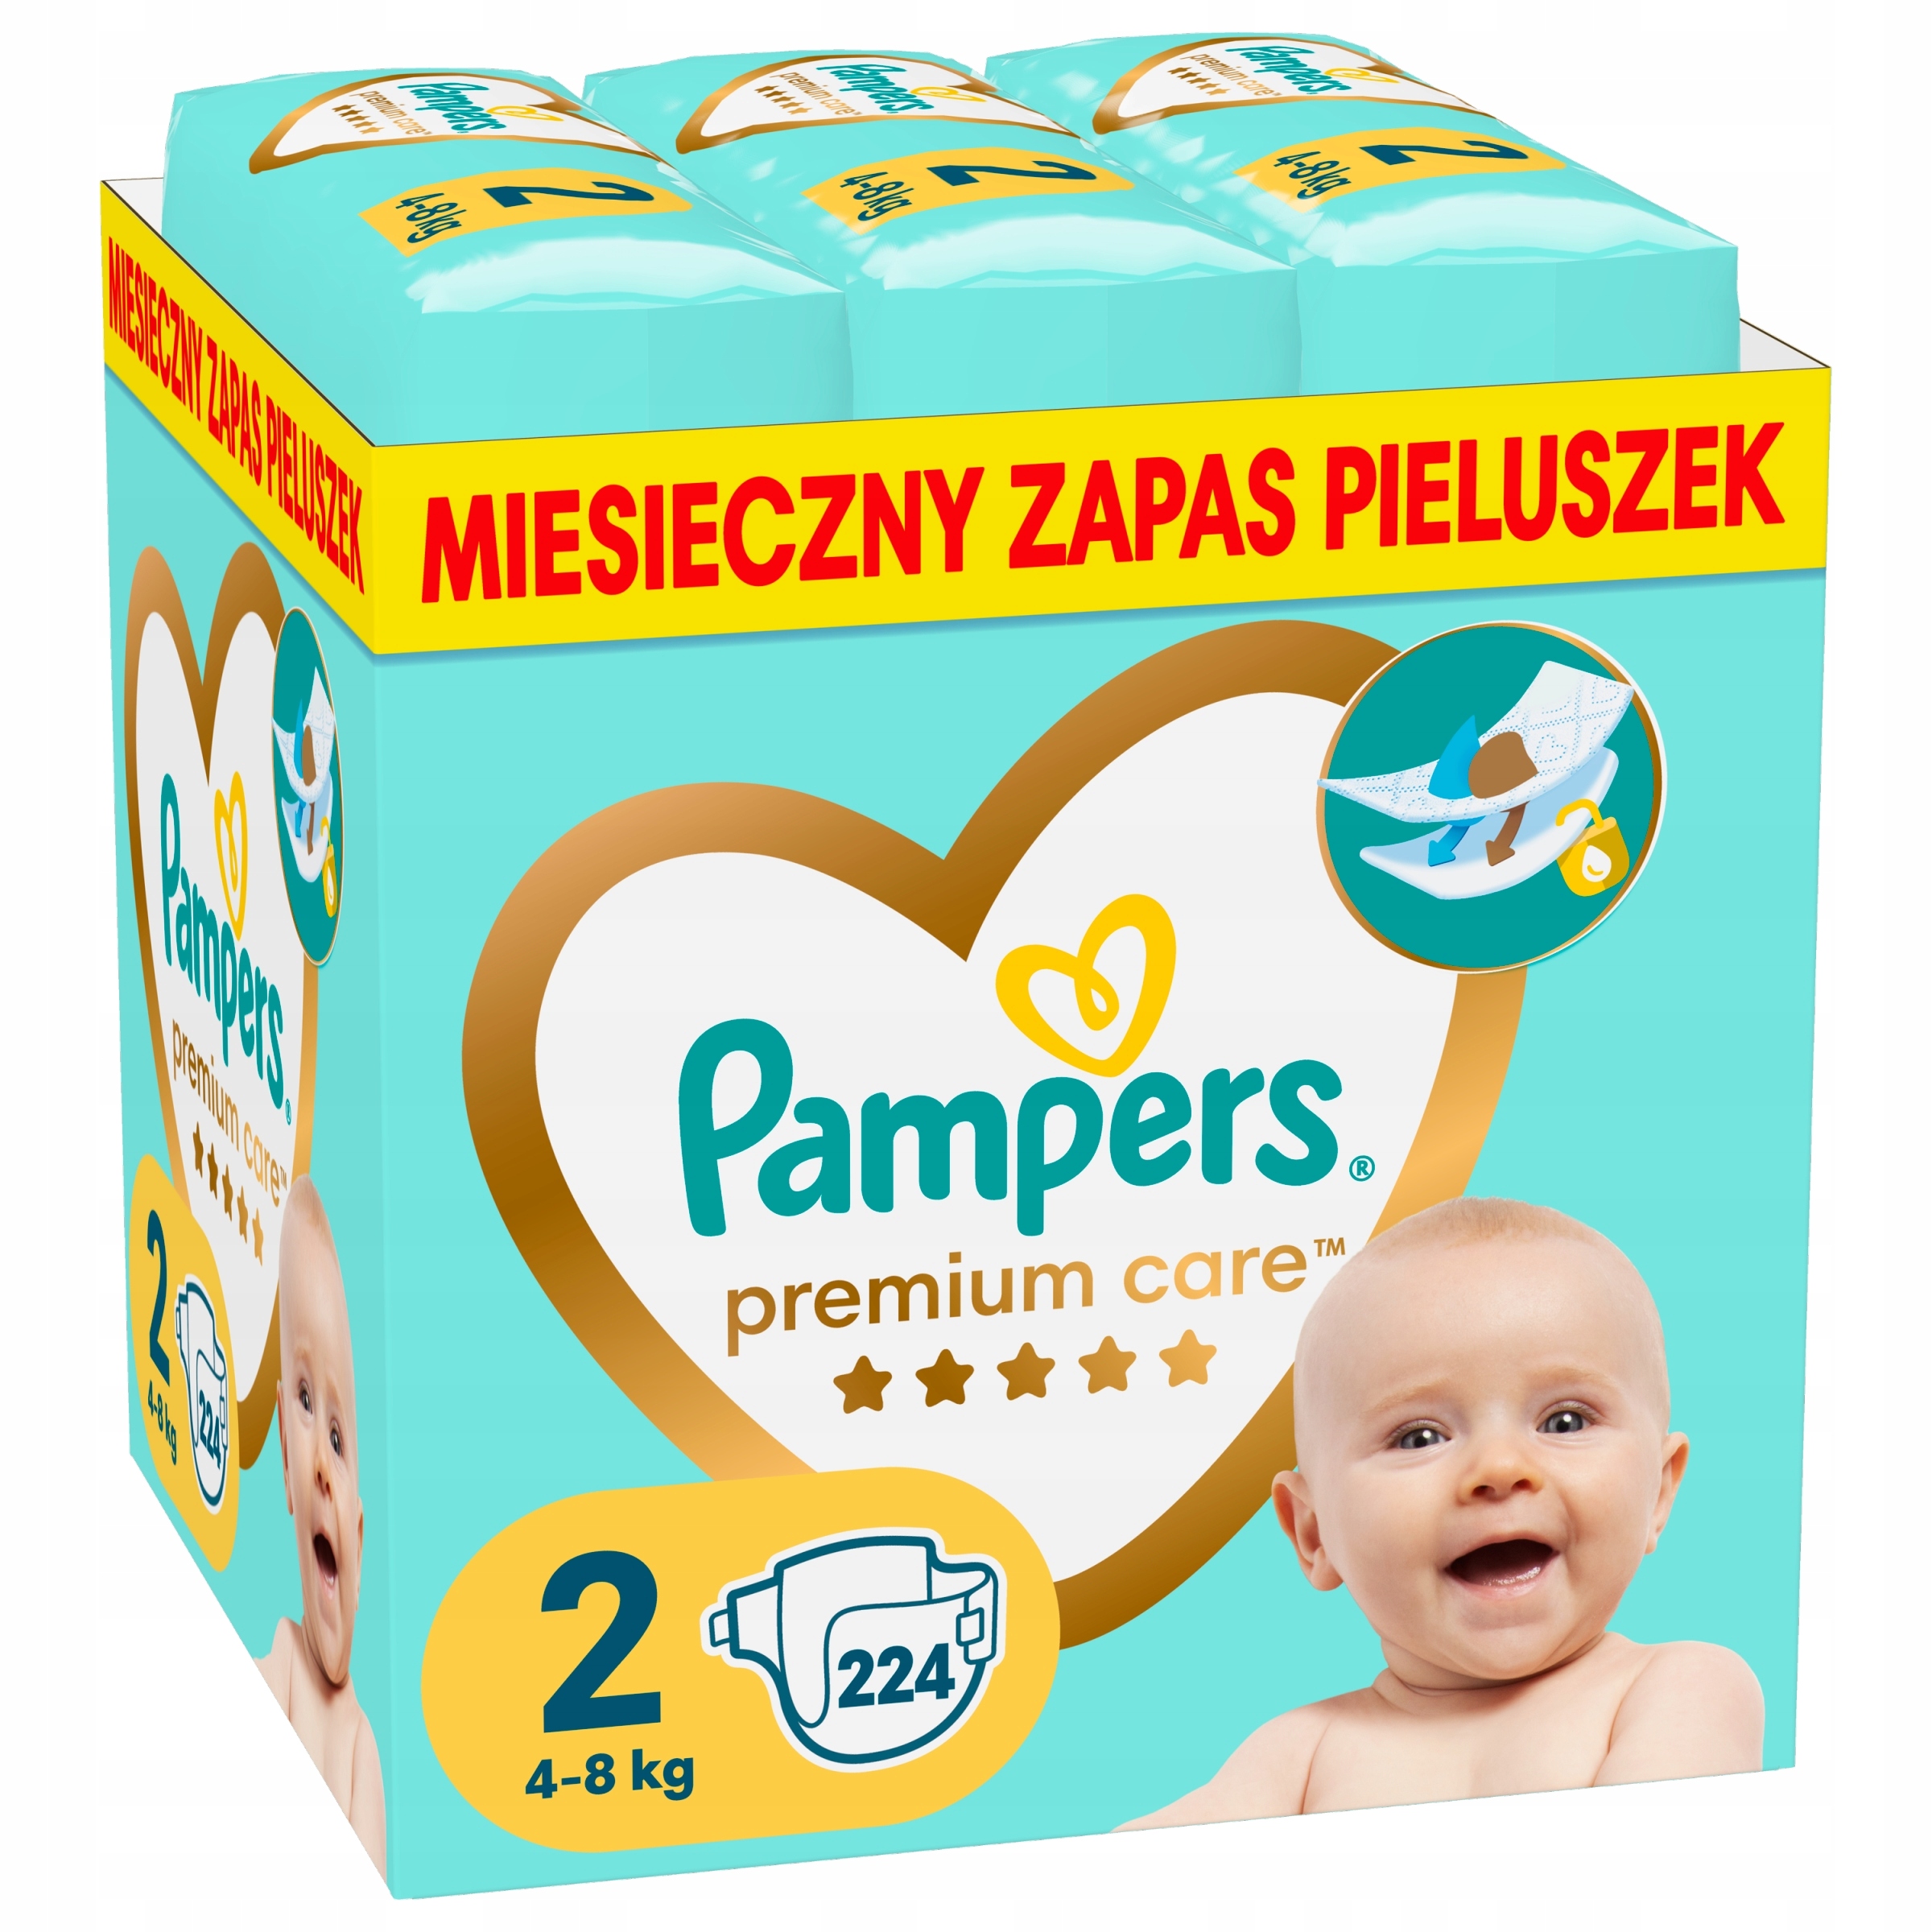 pampers leeps and play